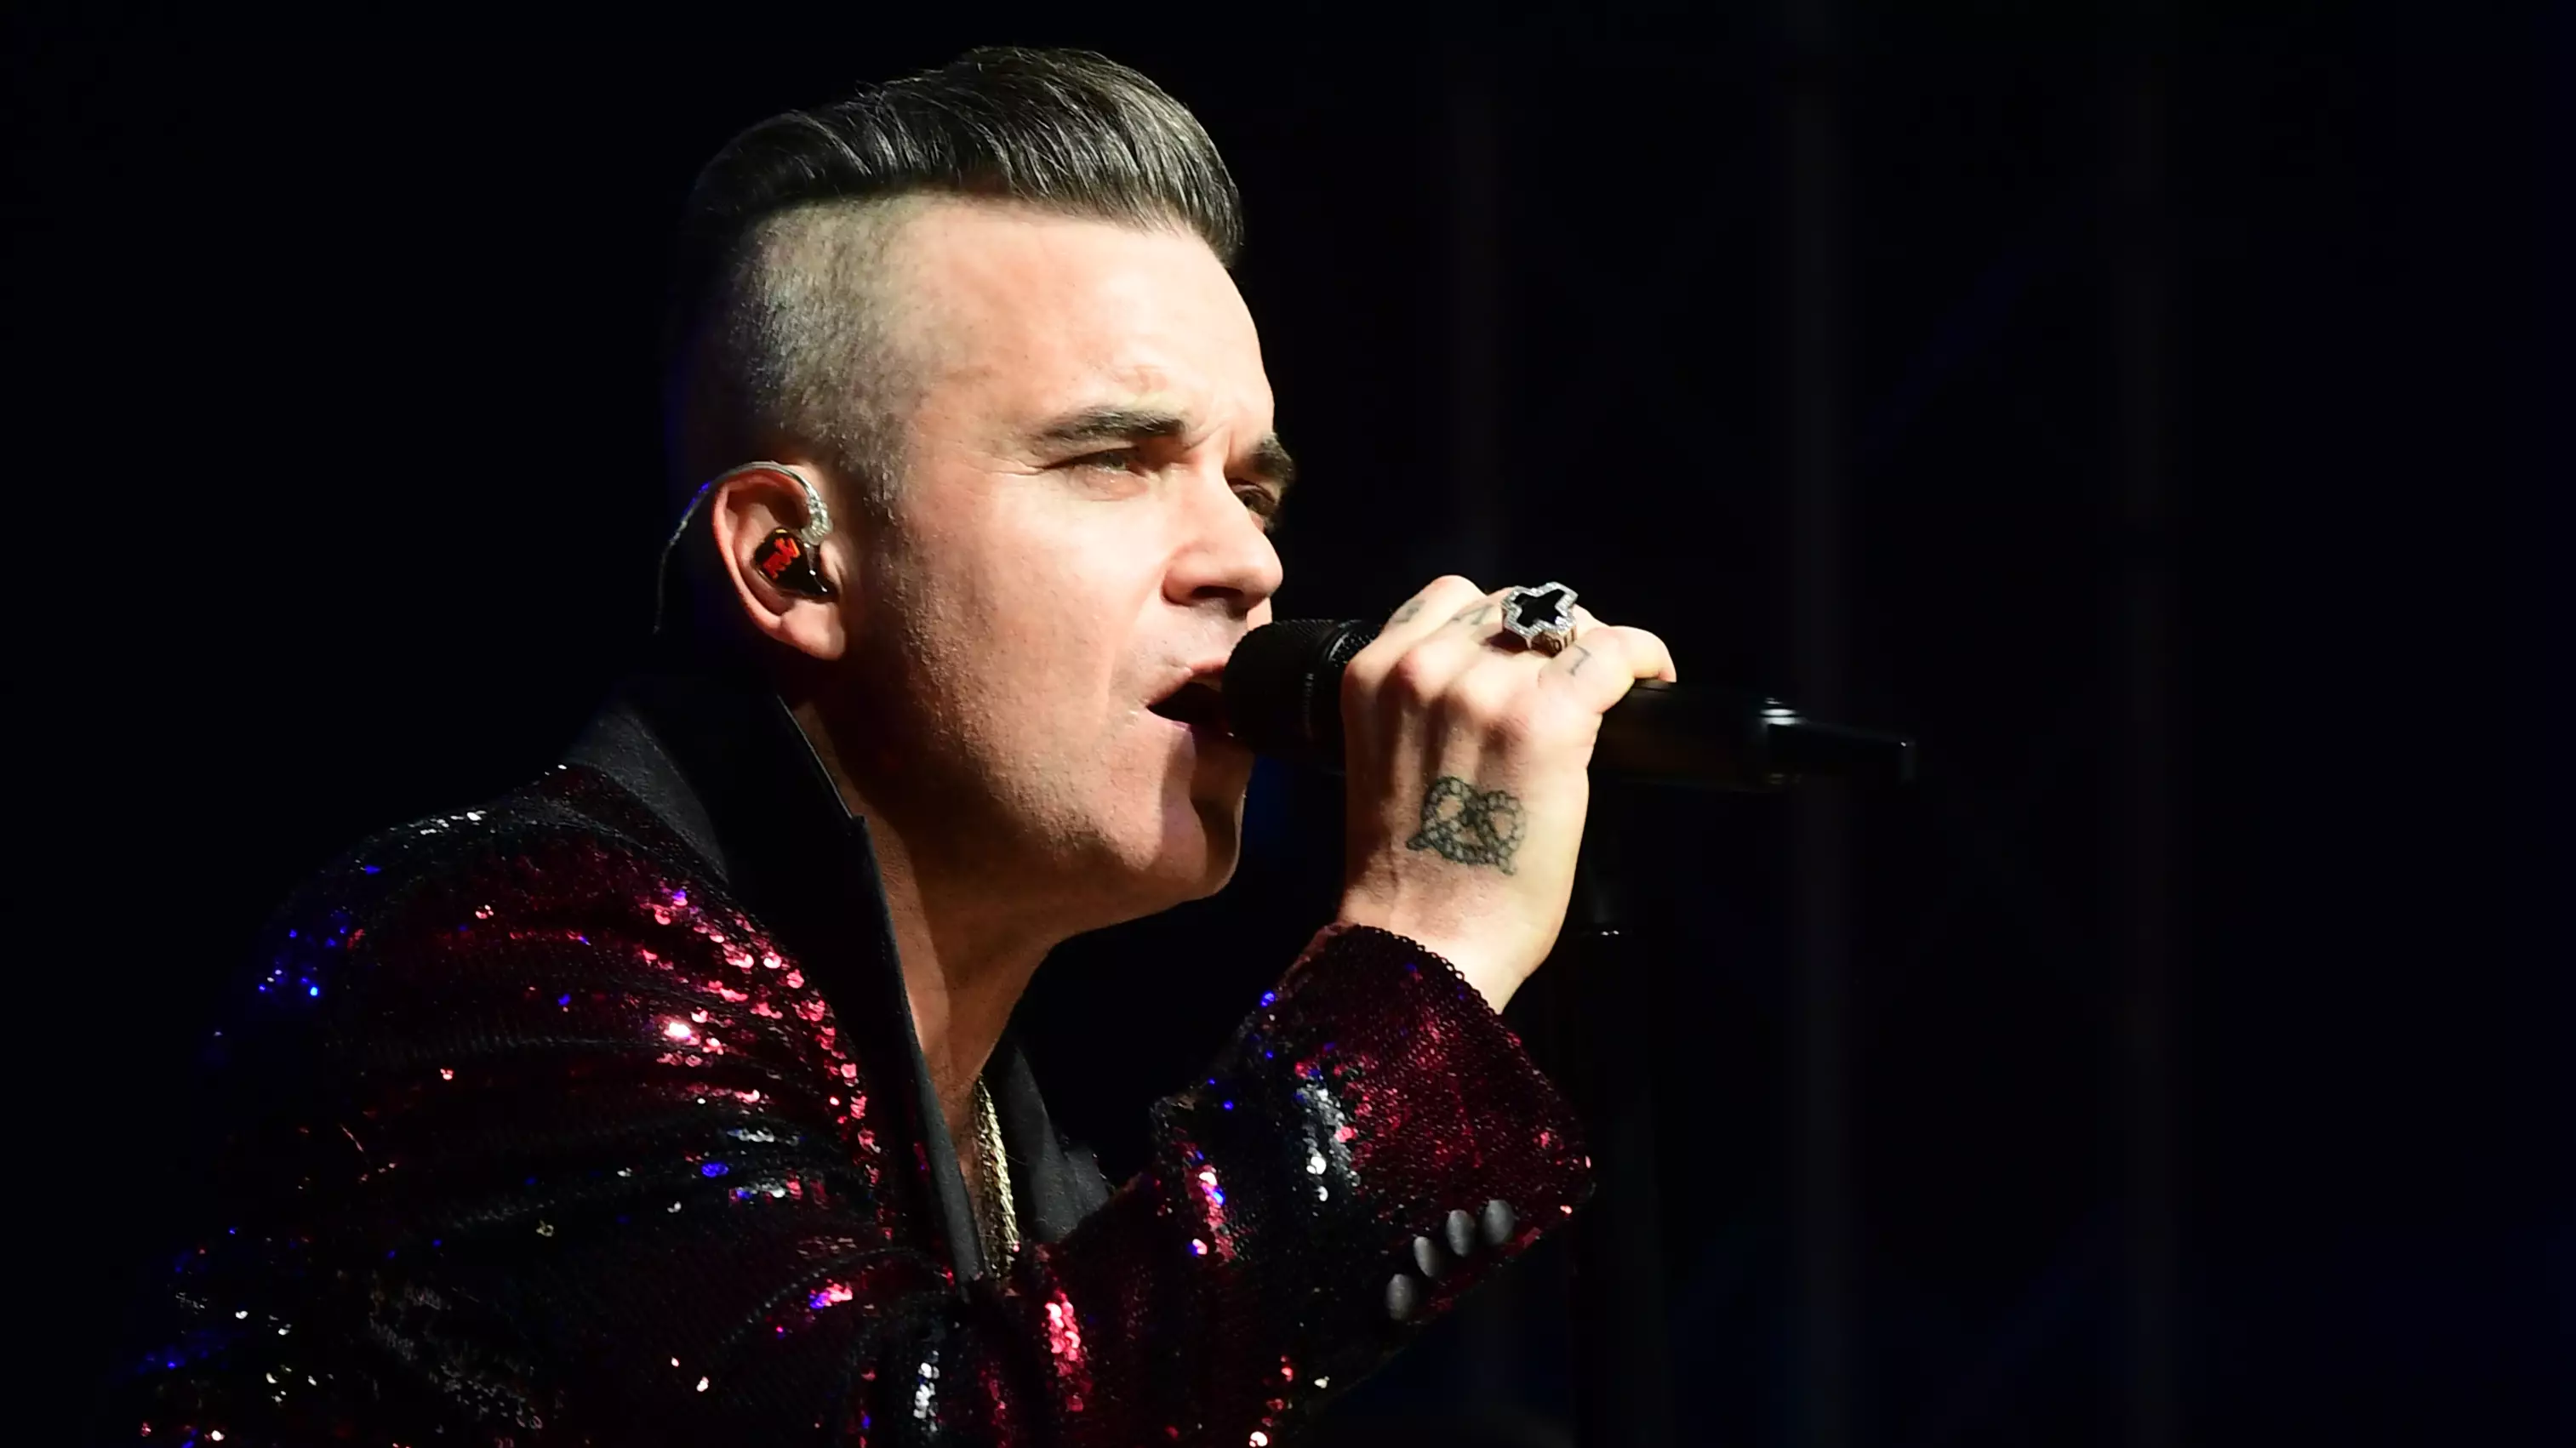 Robbie Williams Just Dropped An Entire Christmas Album